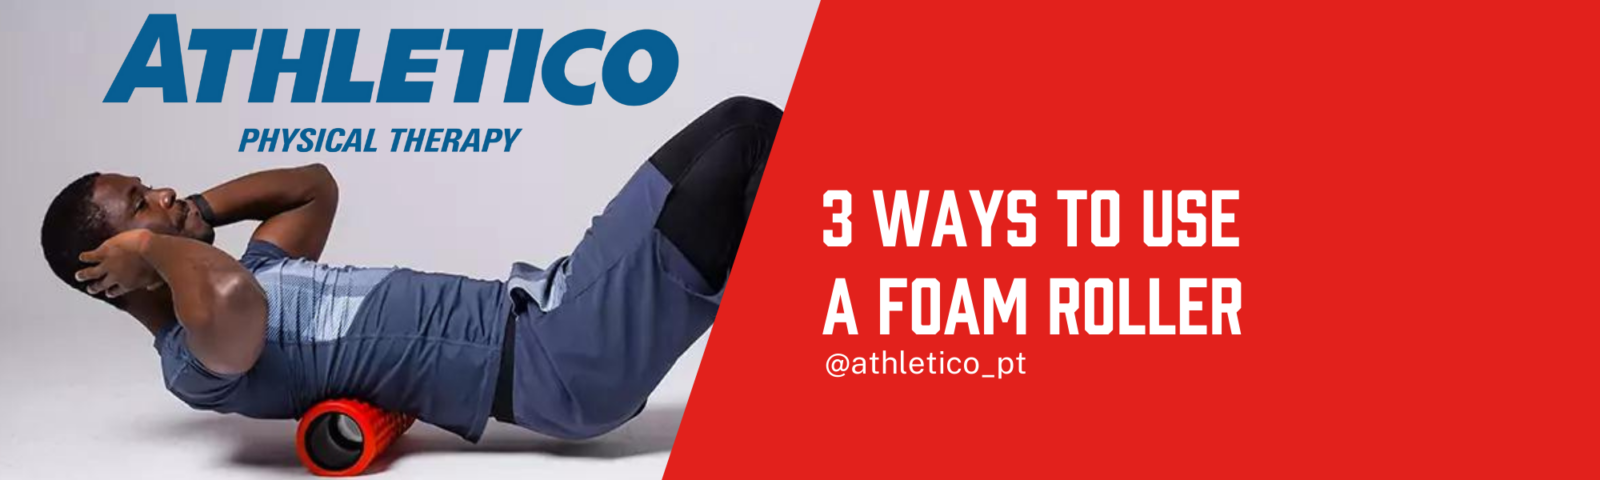 3 Ways to Use a Foam Roller - Run Project